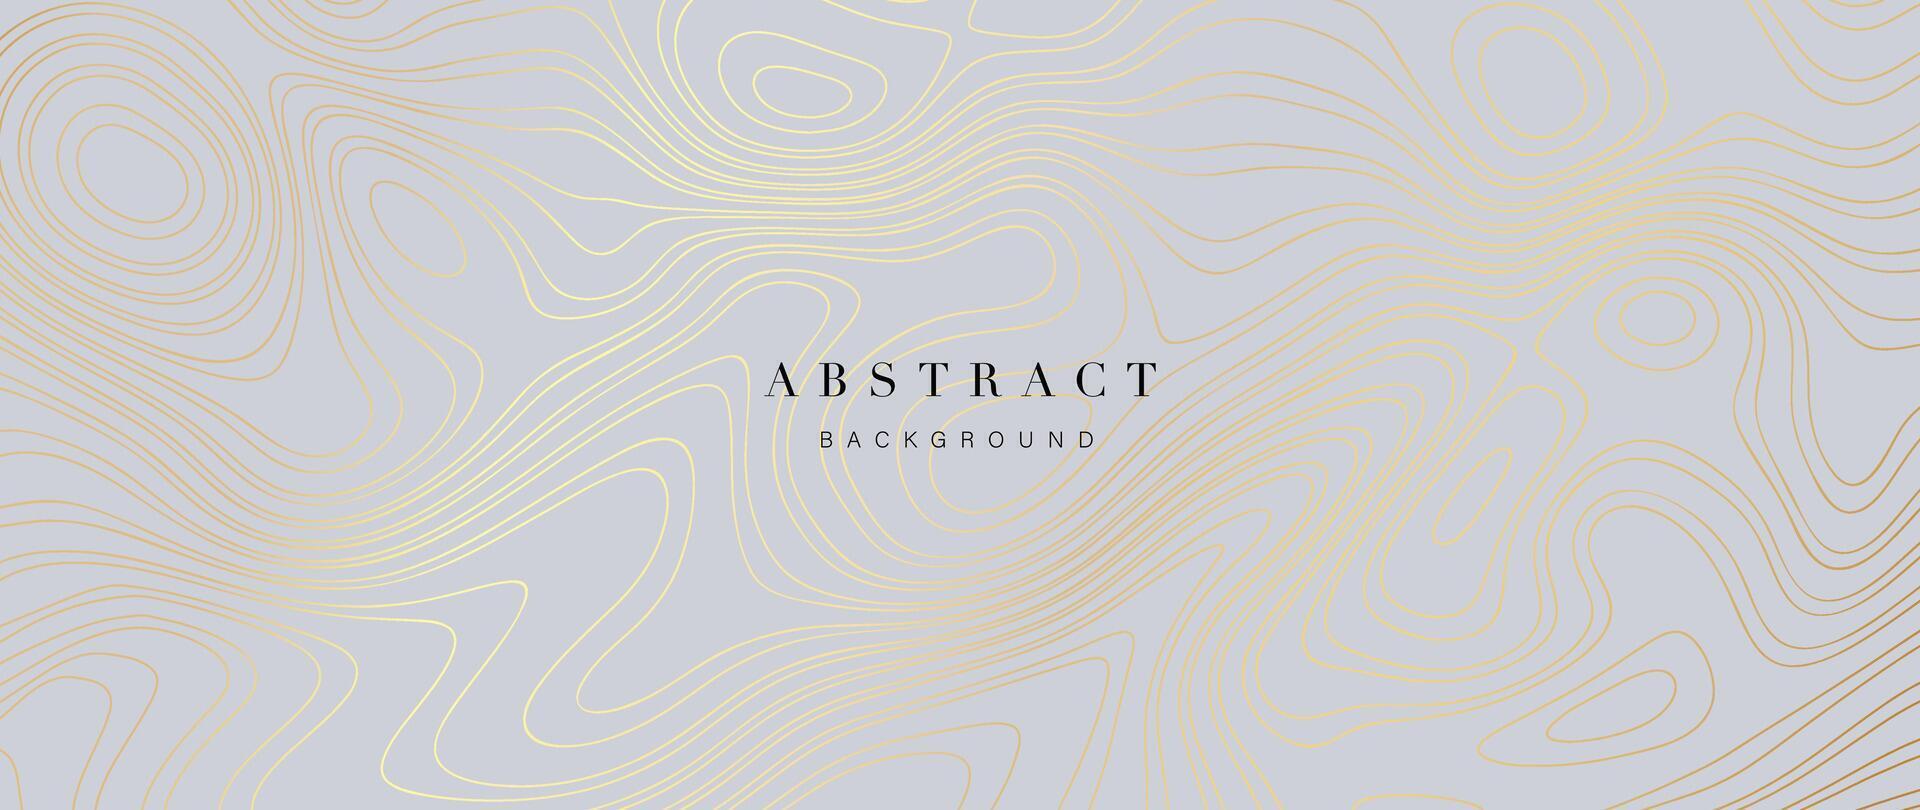 Abstract line art gray background vector. Mountain topographic map wallpaper with gold lines texture. Elegant illustration design for wall arts, fabric , packaging, web, banner. vector